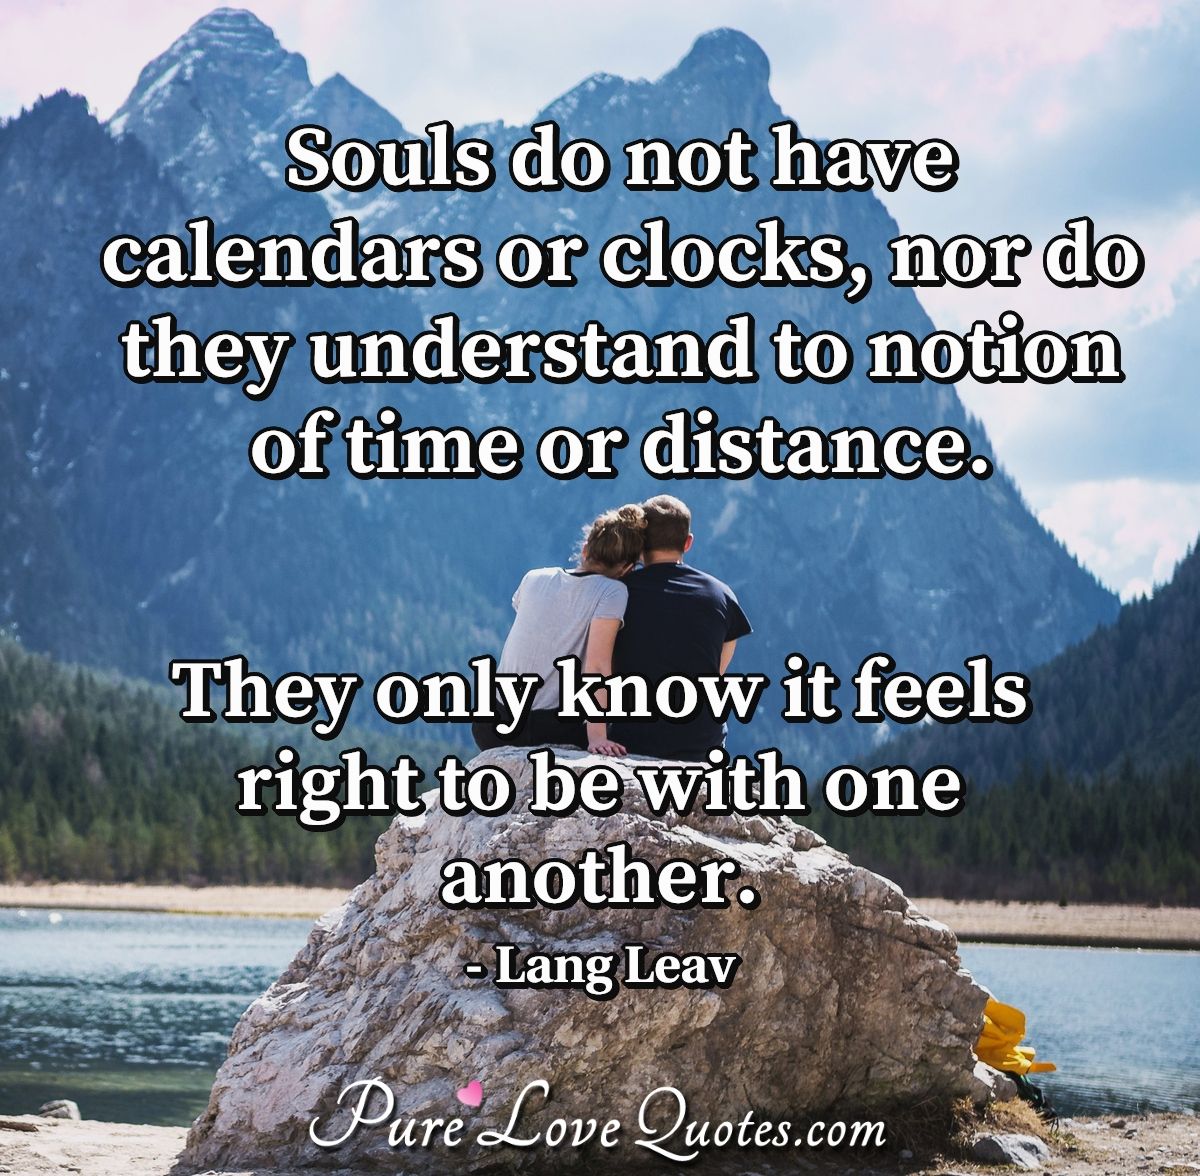 Souls do not have calendars or clocks, nor do they understand to notion of time or distance. They only know it feels right to be with one another. - Lang Leav